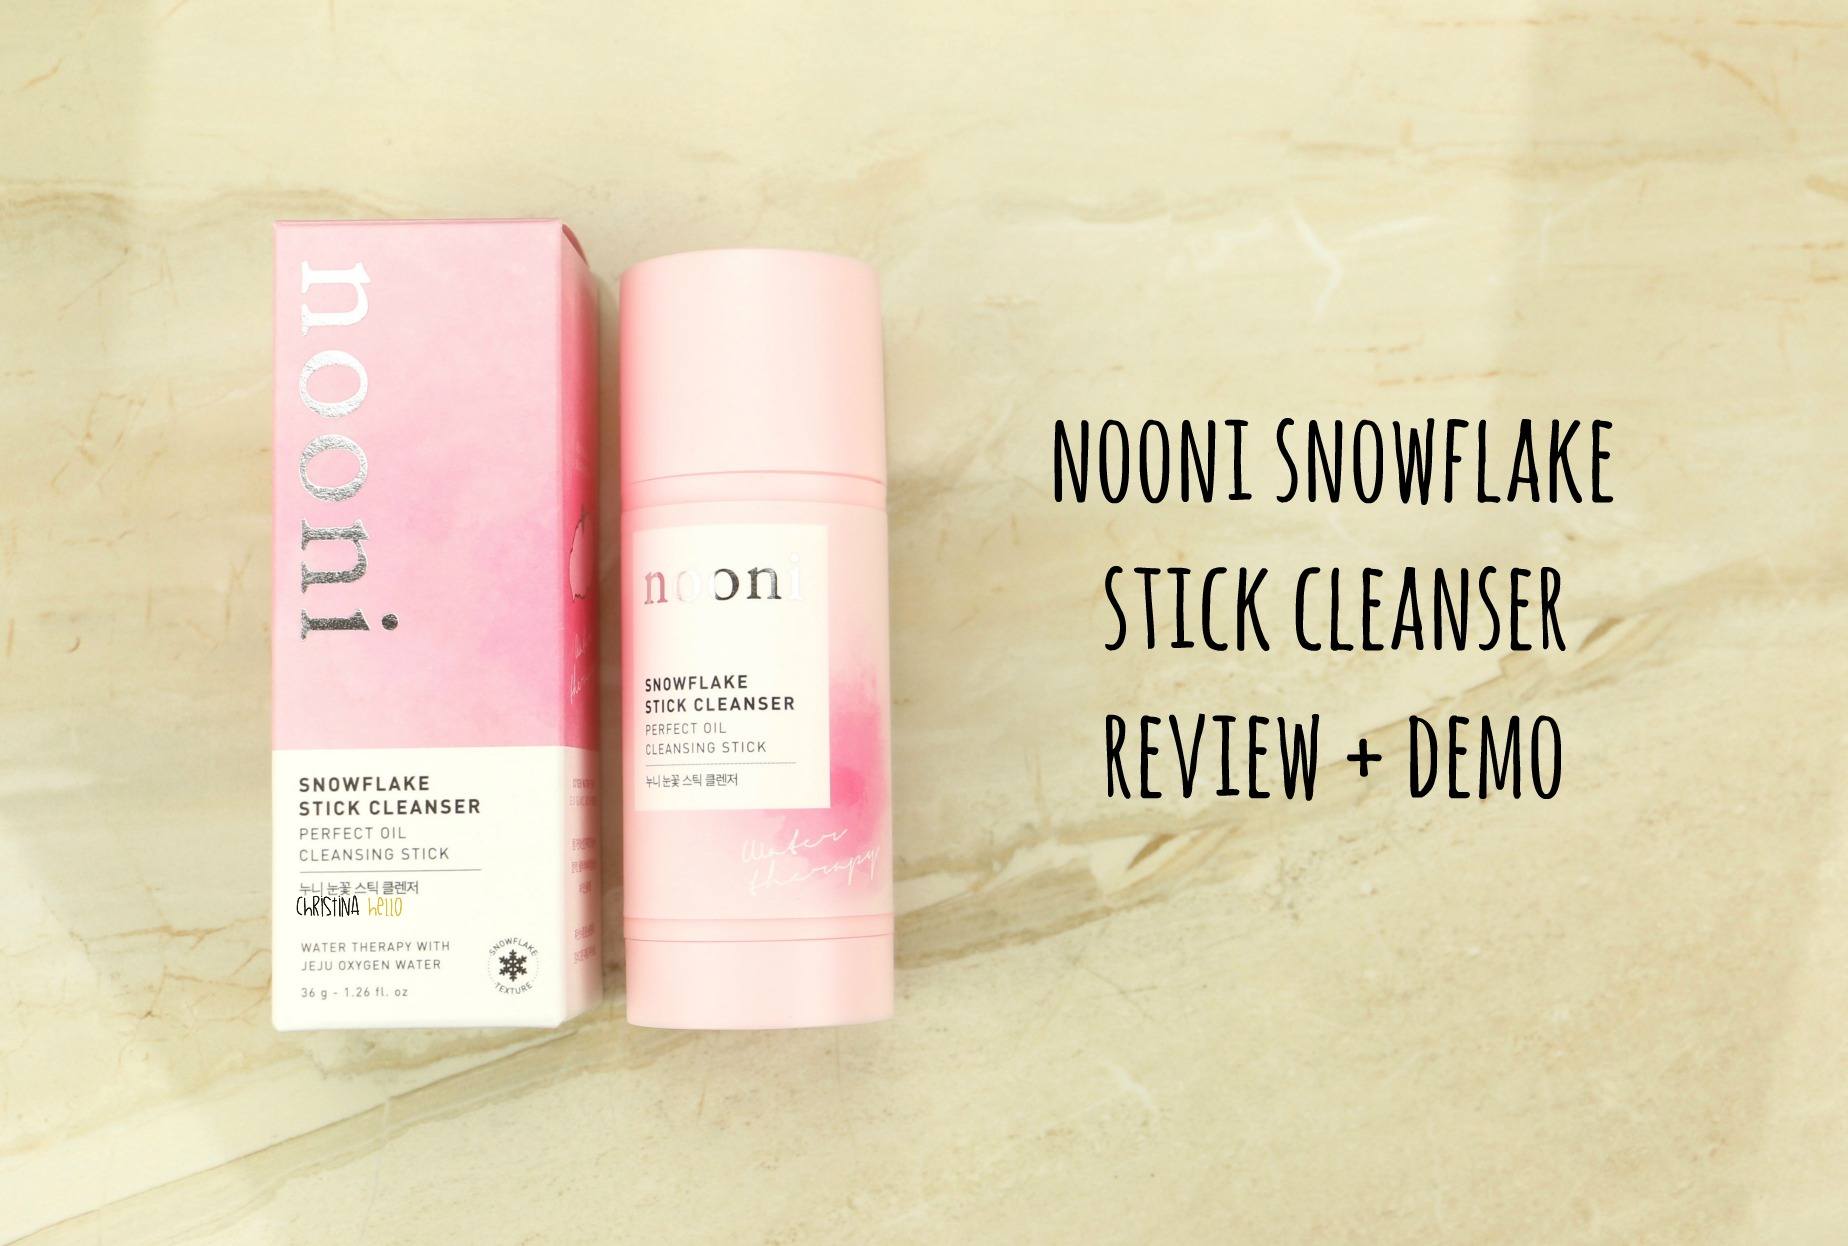 Nooni snowflake stick cleanser review